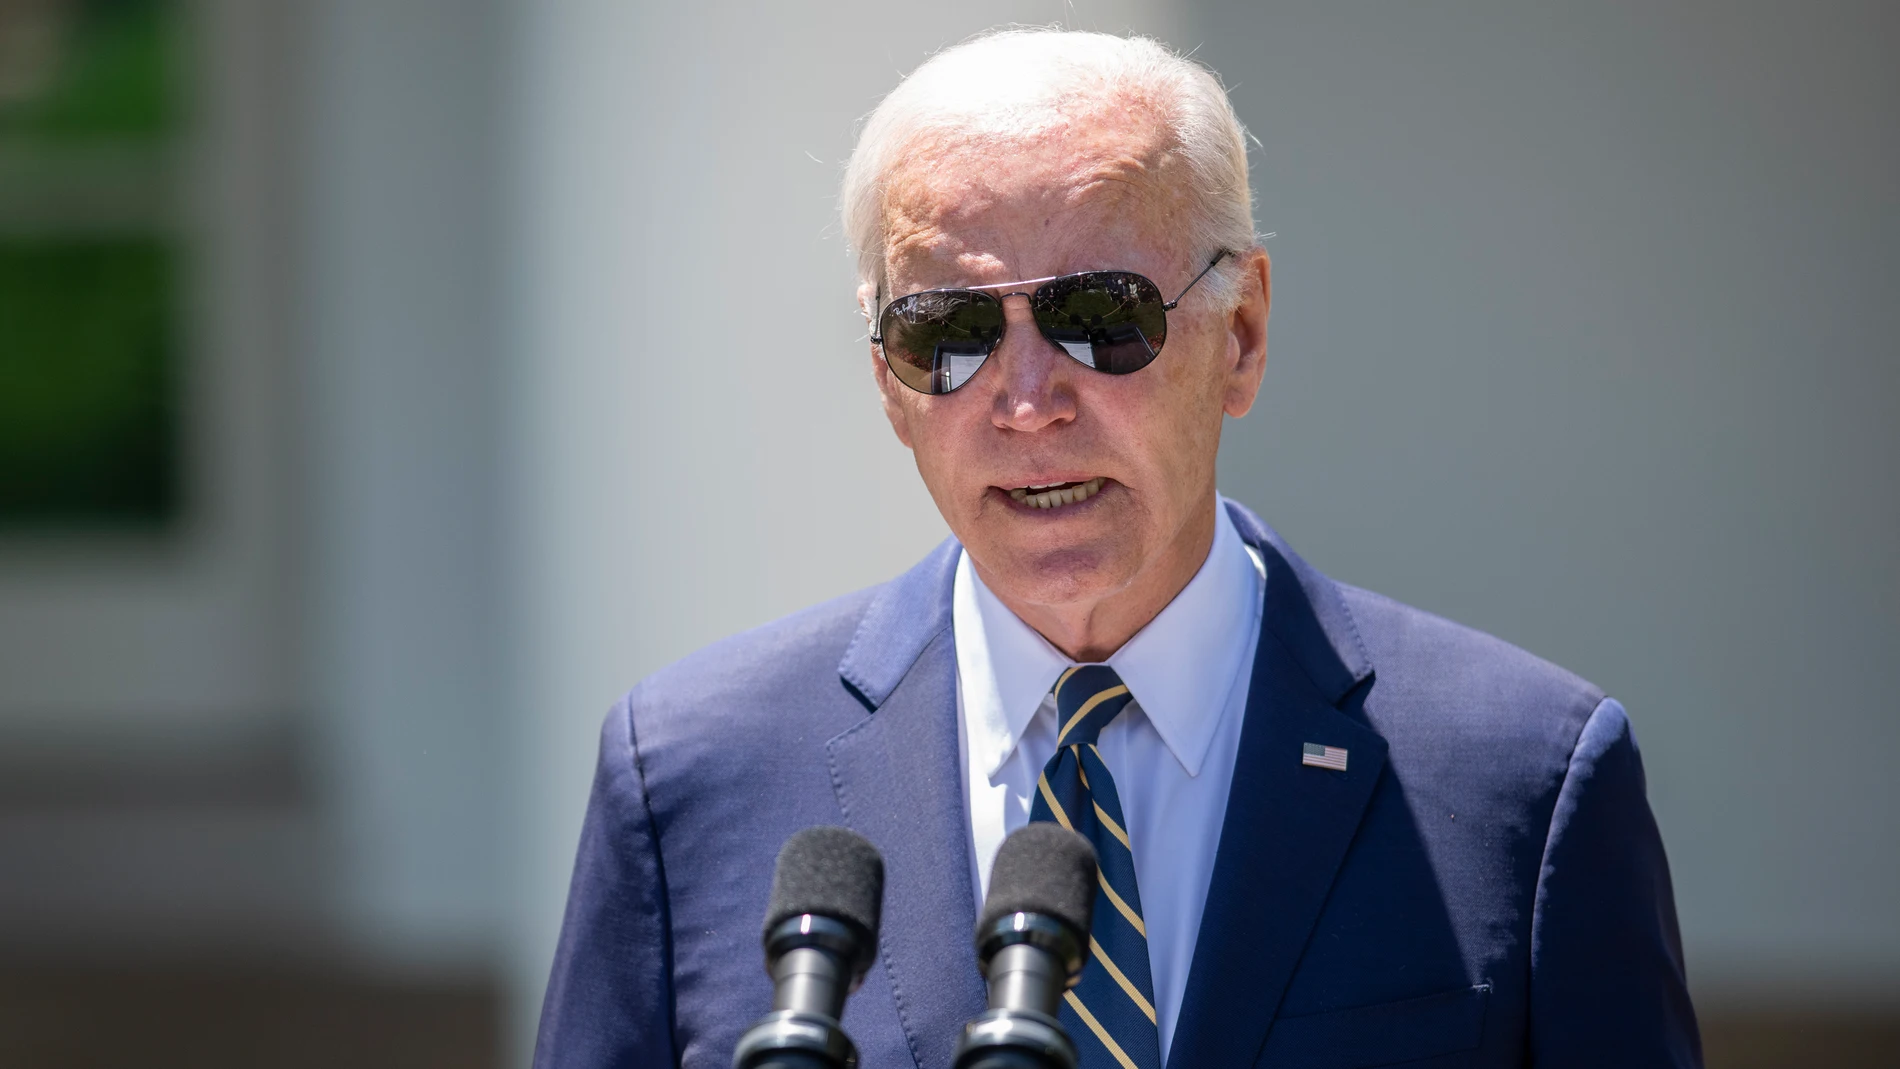 May 25, 2023, Washington, District of Columbia, USA: United States President Joe Biden offers remarks to nominate General Charles Q. Brown, Jr., to serve as the next Chairman of the Joint Chiefs of Staff, in the Rose Garden at the White House in Washington, DC, Thursday, May 25, 2023 25/05/2023